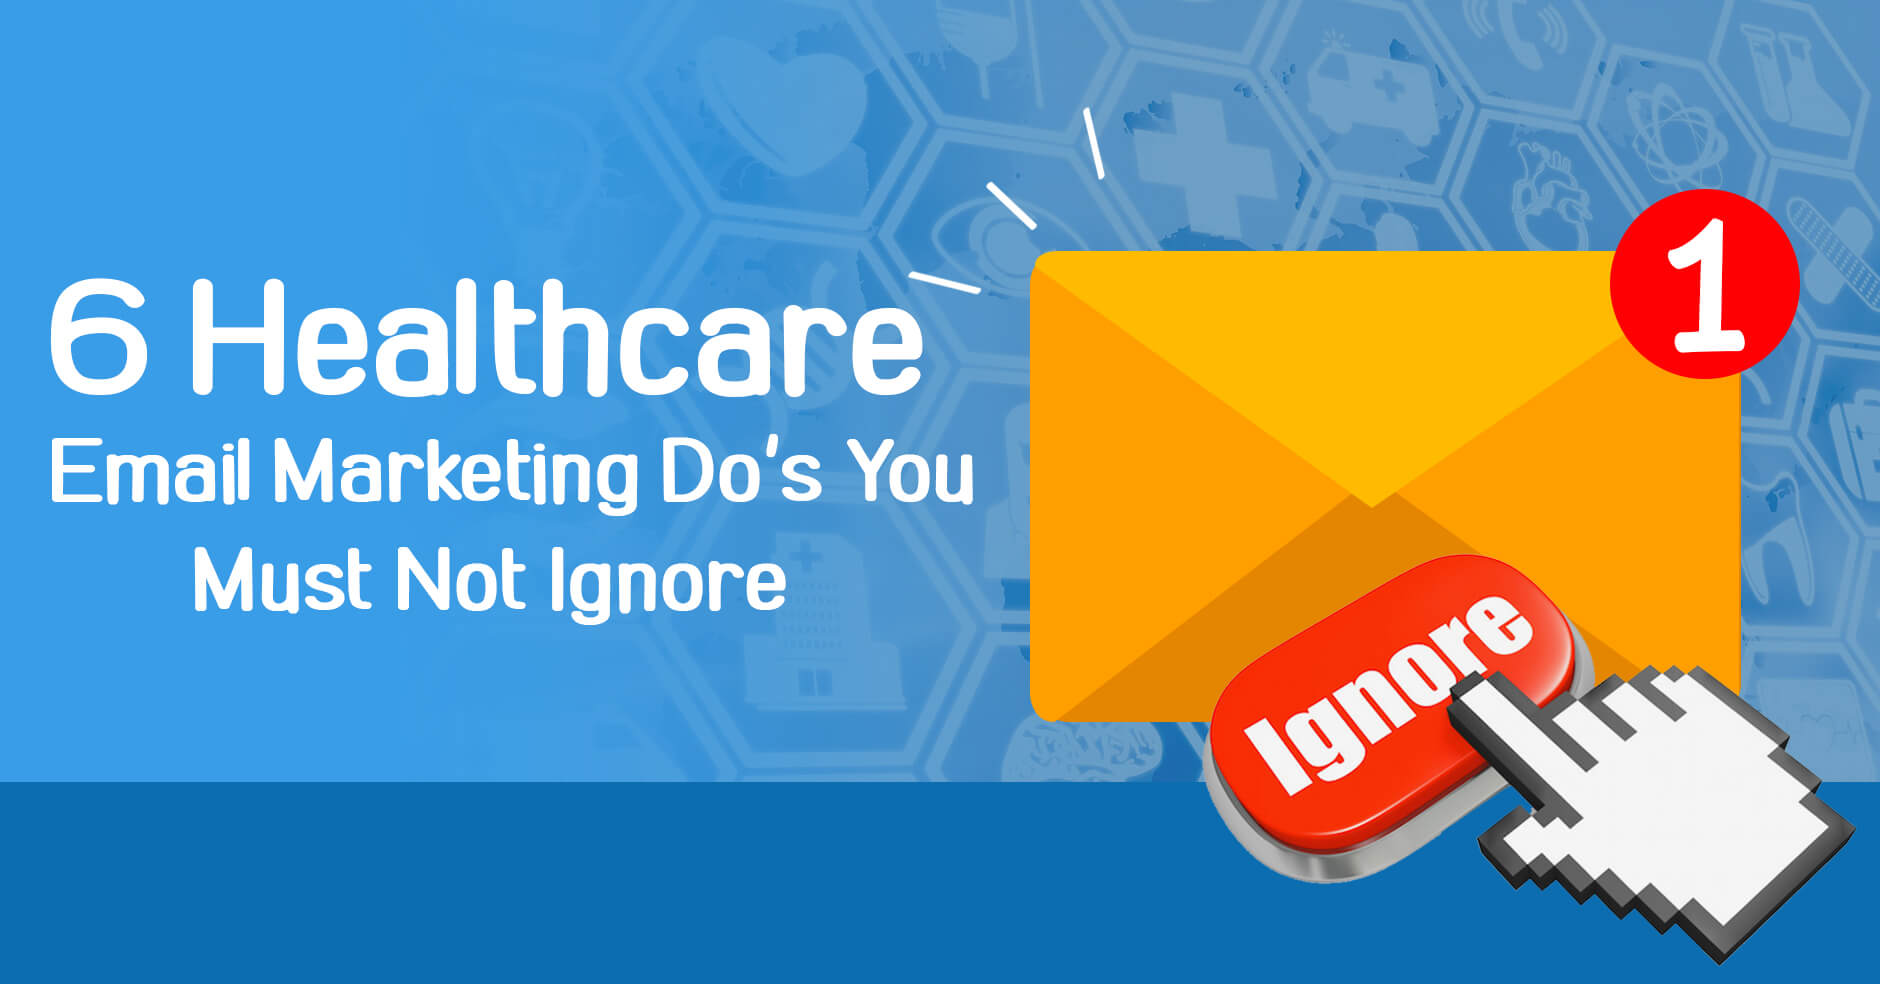 6 Healthcare Email Marketing Do’s You Must Not Ignore